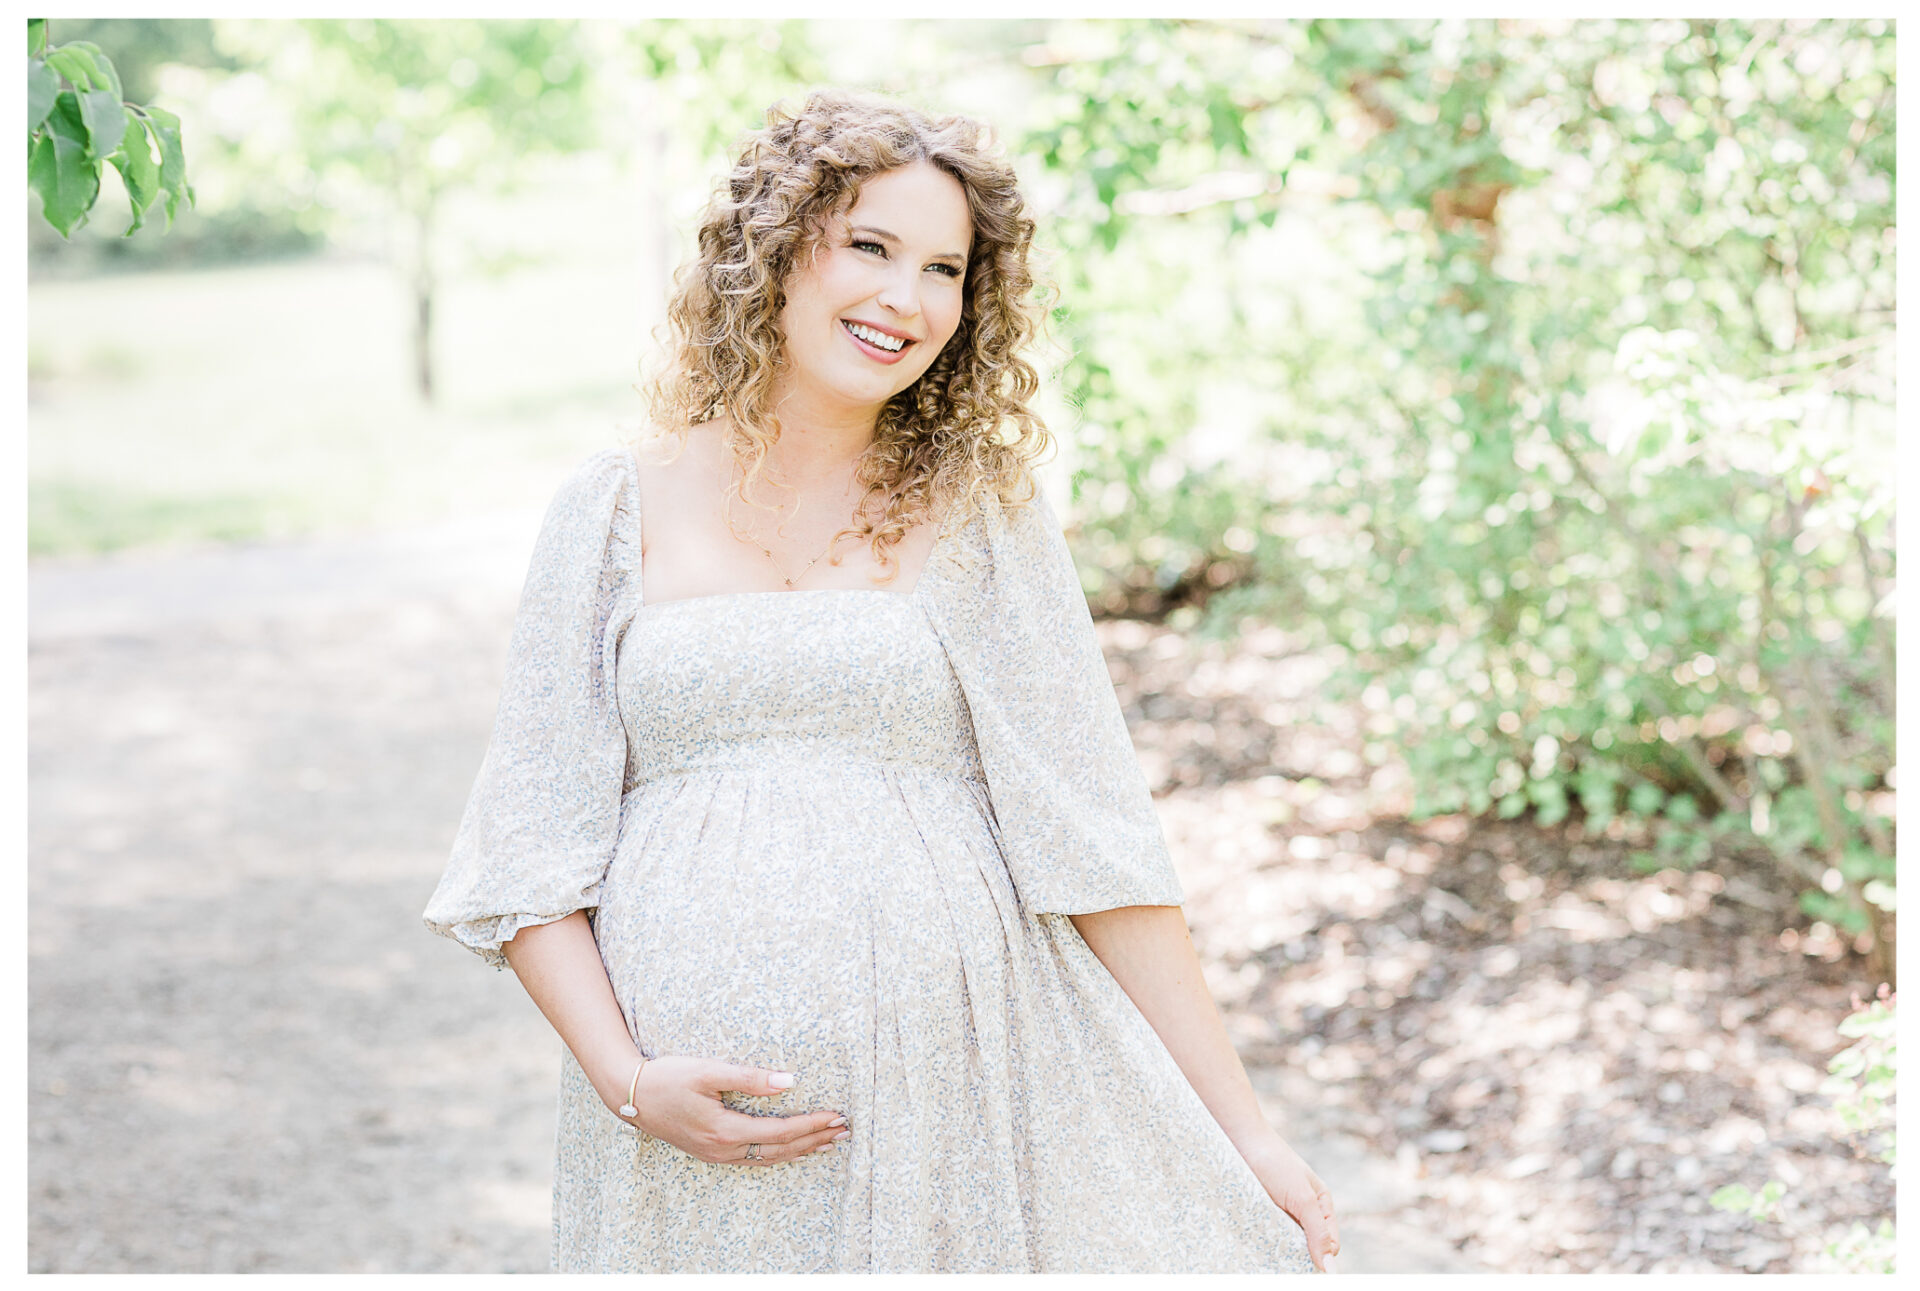 Winter Freire Photography | maternity session outdoors | woman smiling holding her baby bump